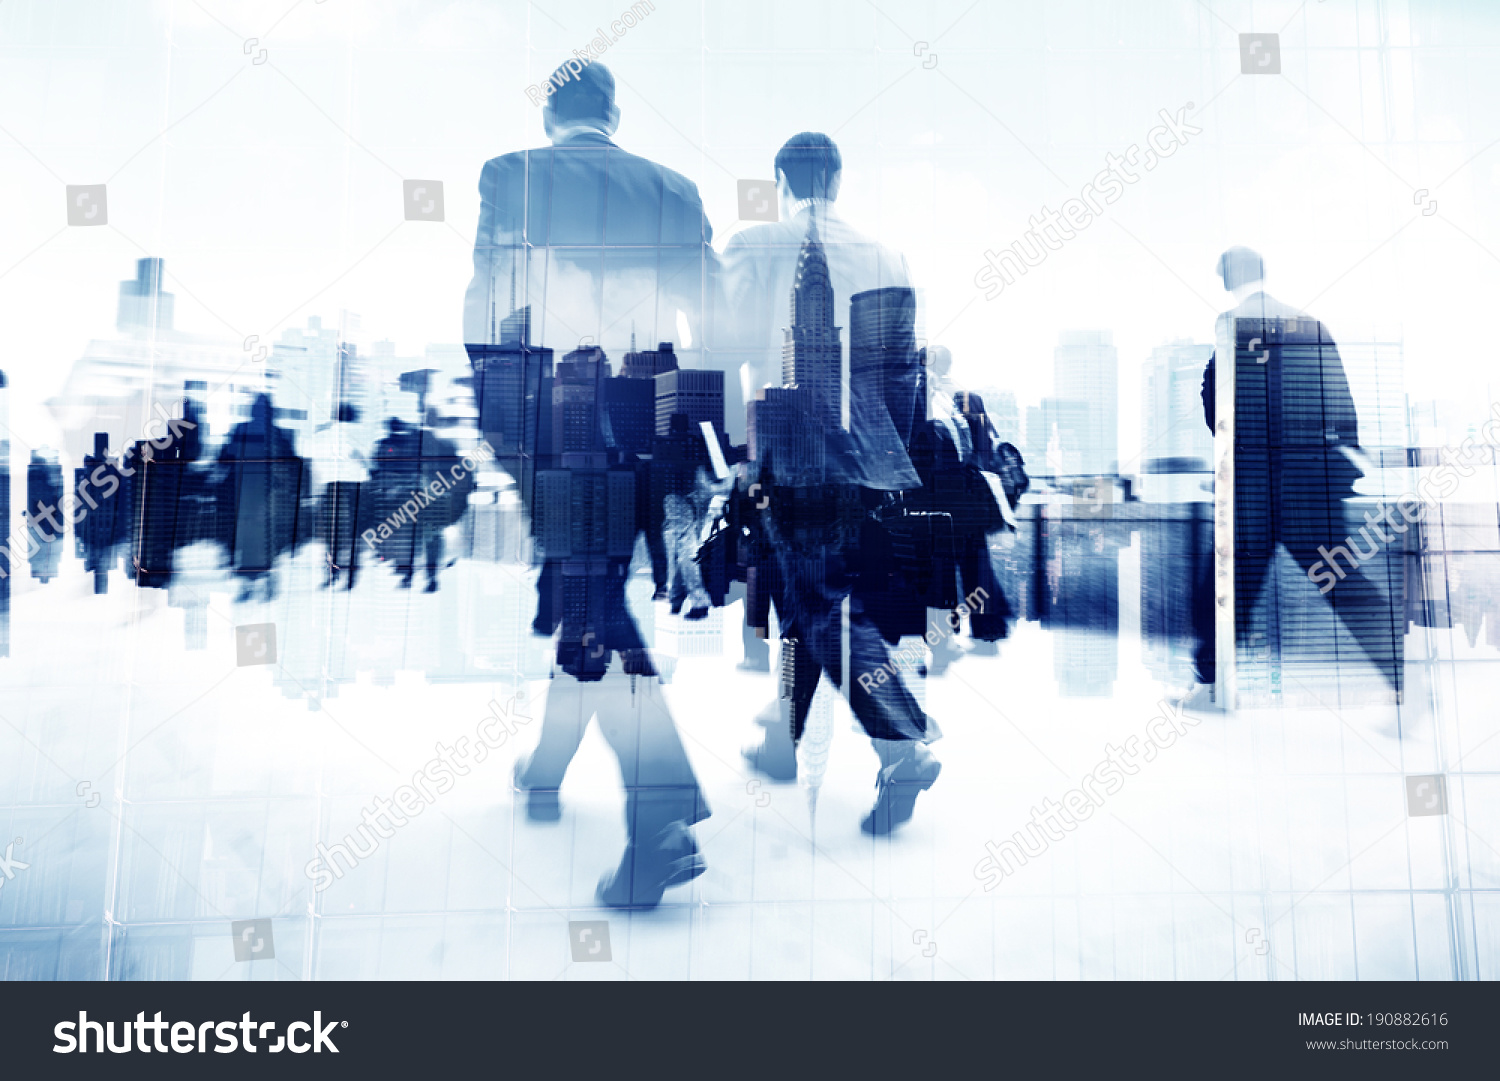 Abstract Image of Business People Walking on the Street #190882616